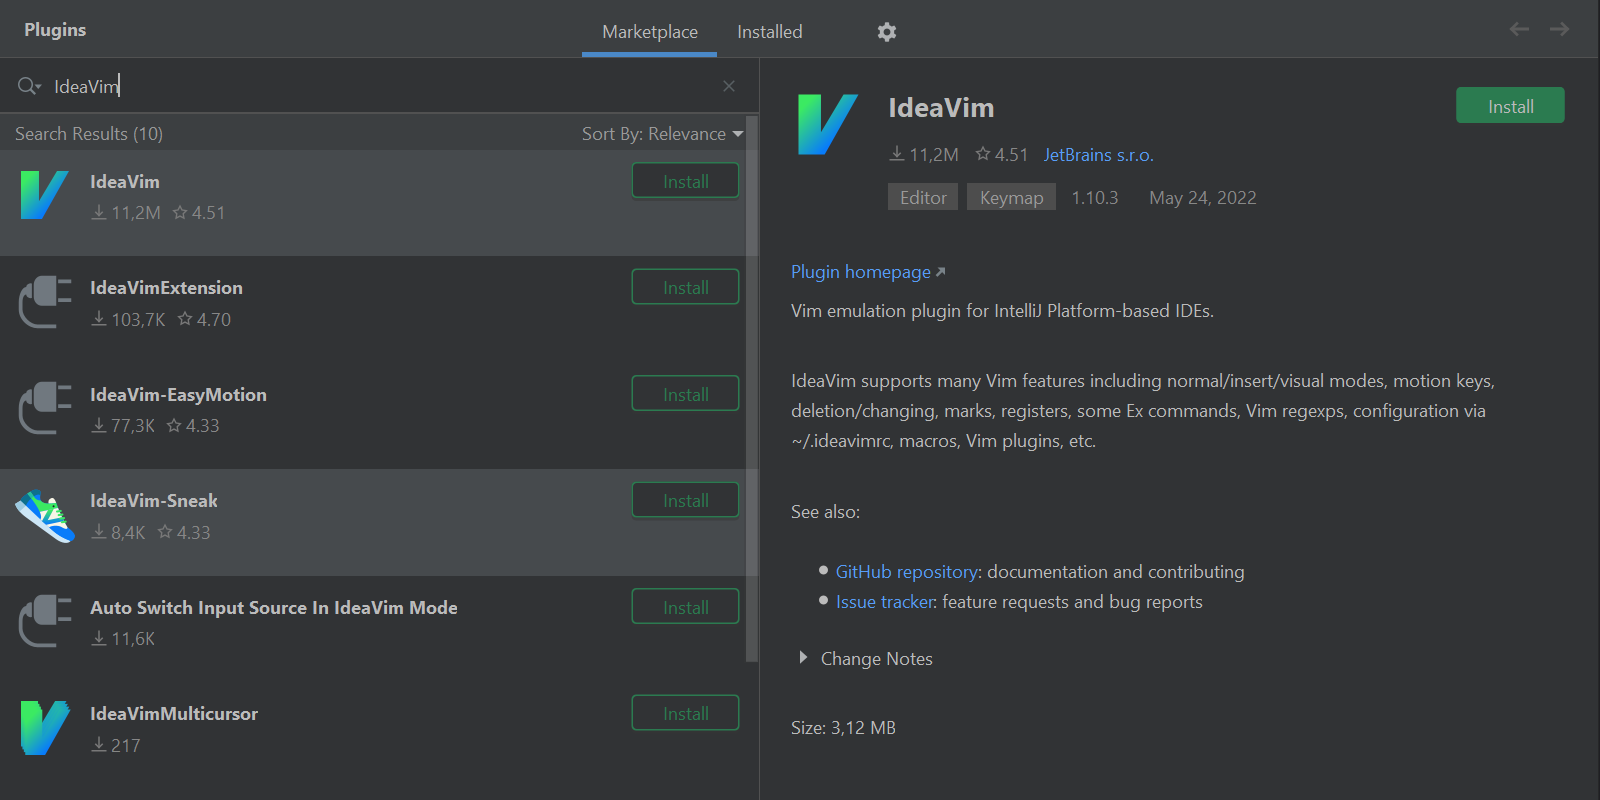 Installing the IdeaVim plugin from the settings